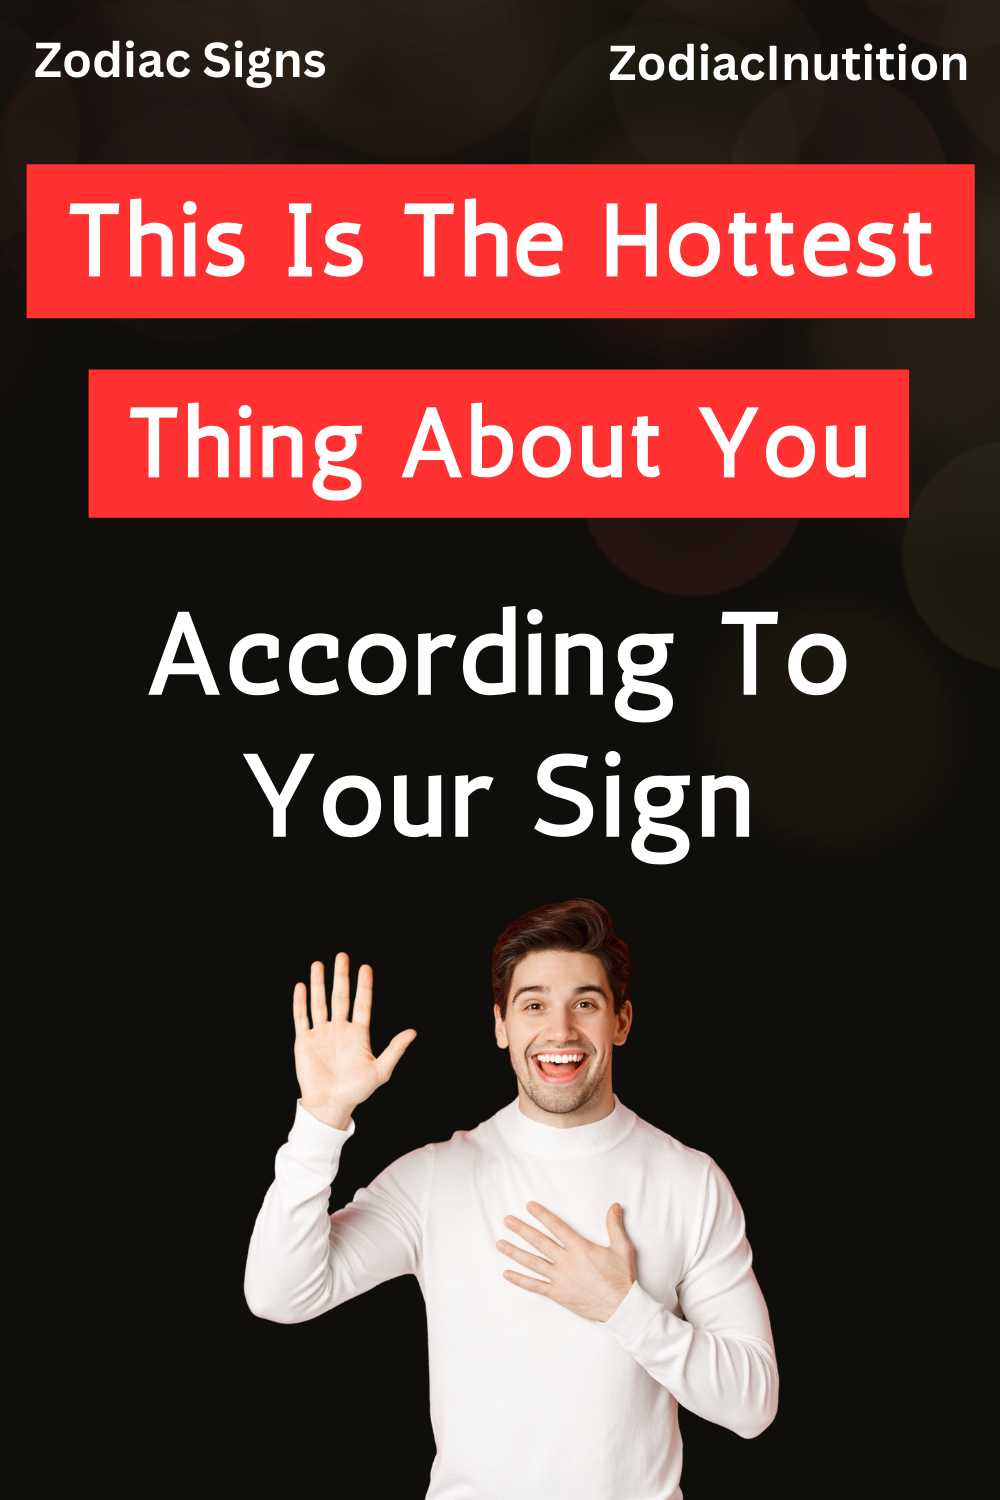 This Is The Hottest Thing About You According To Your Sign